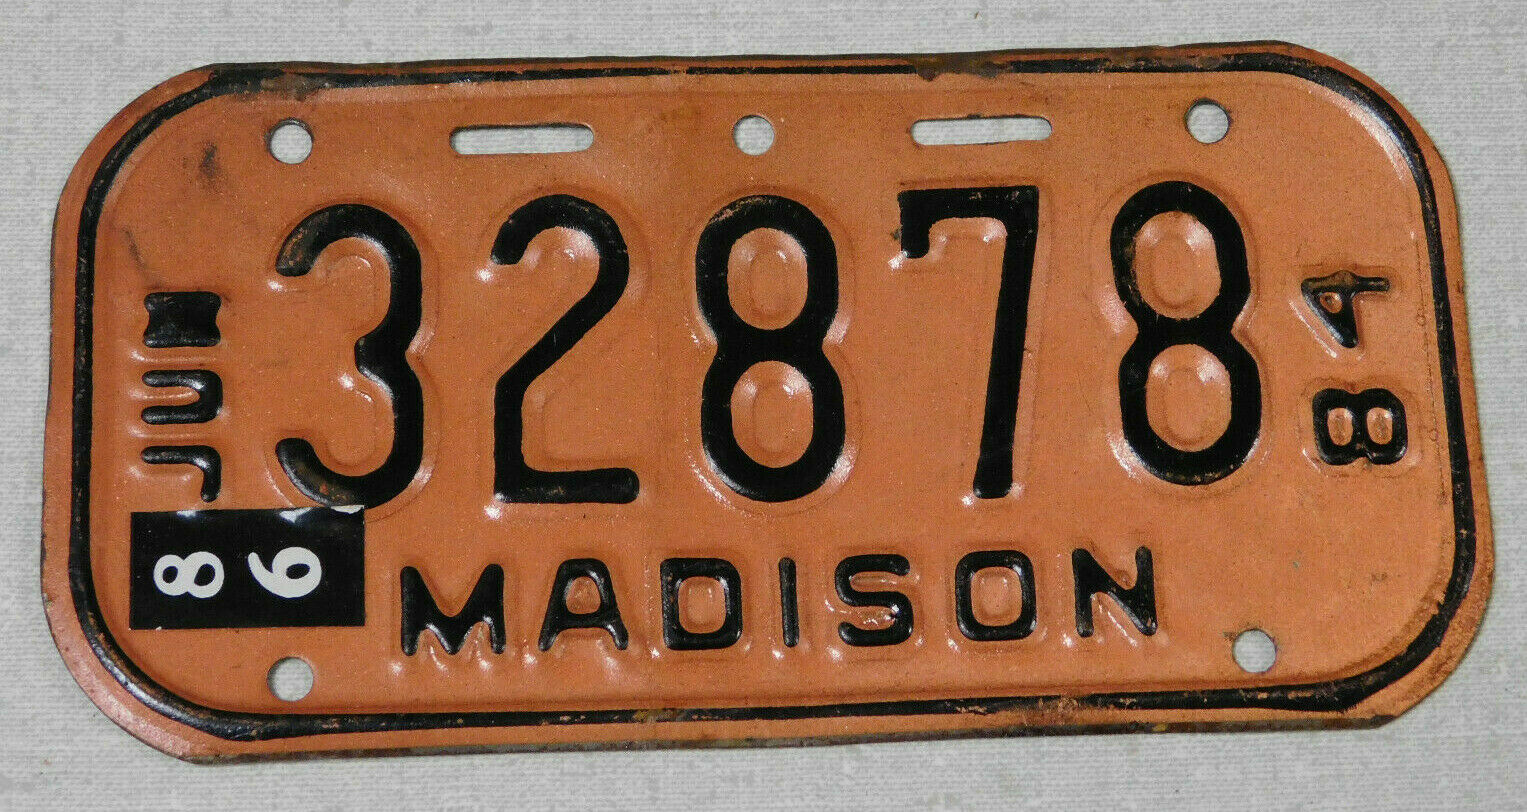 1986 Madison Wisconsin Bicycle License Plate